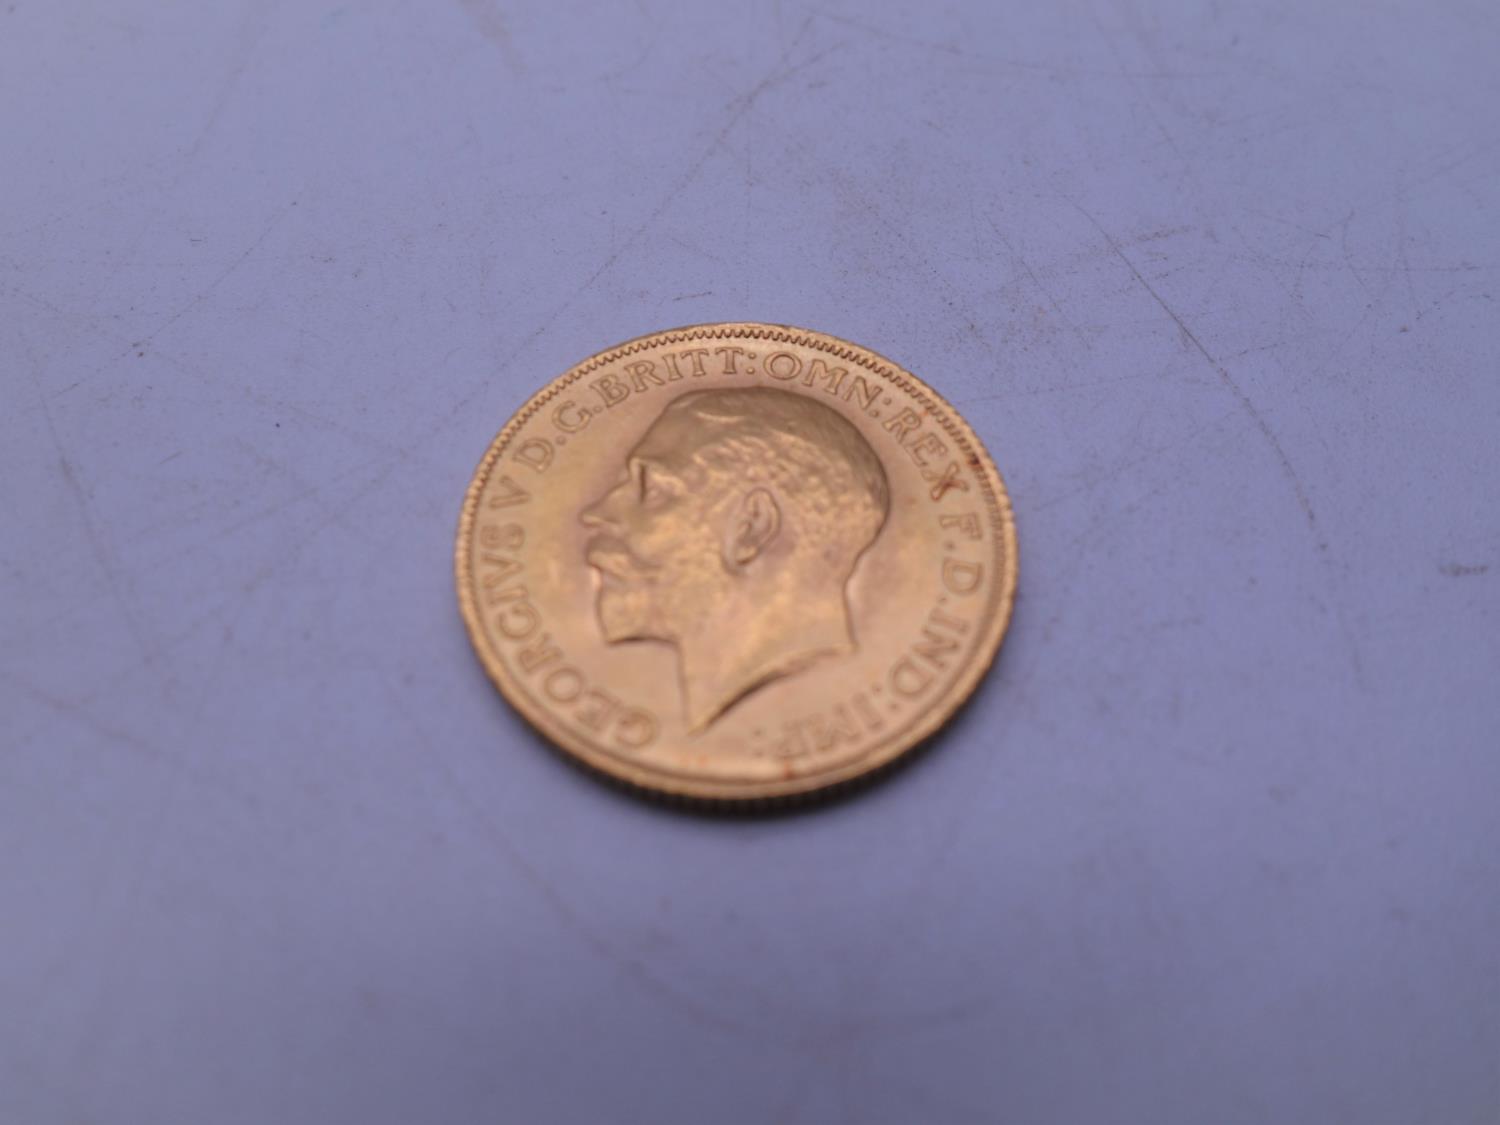 Full GOLD Sovereign 1914, near proof condition, - Image 2 of 3